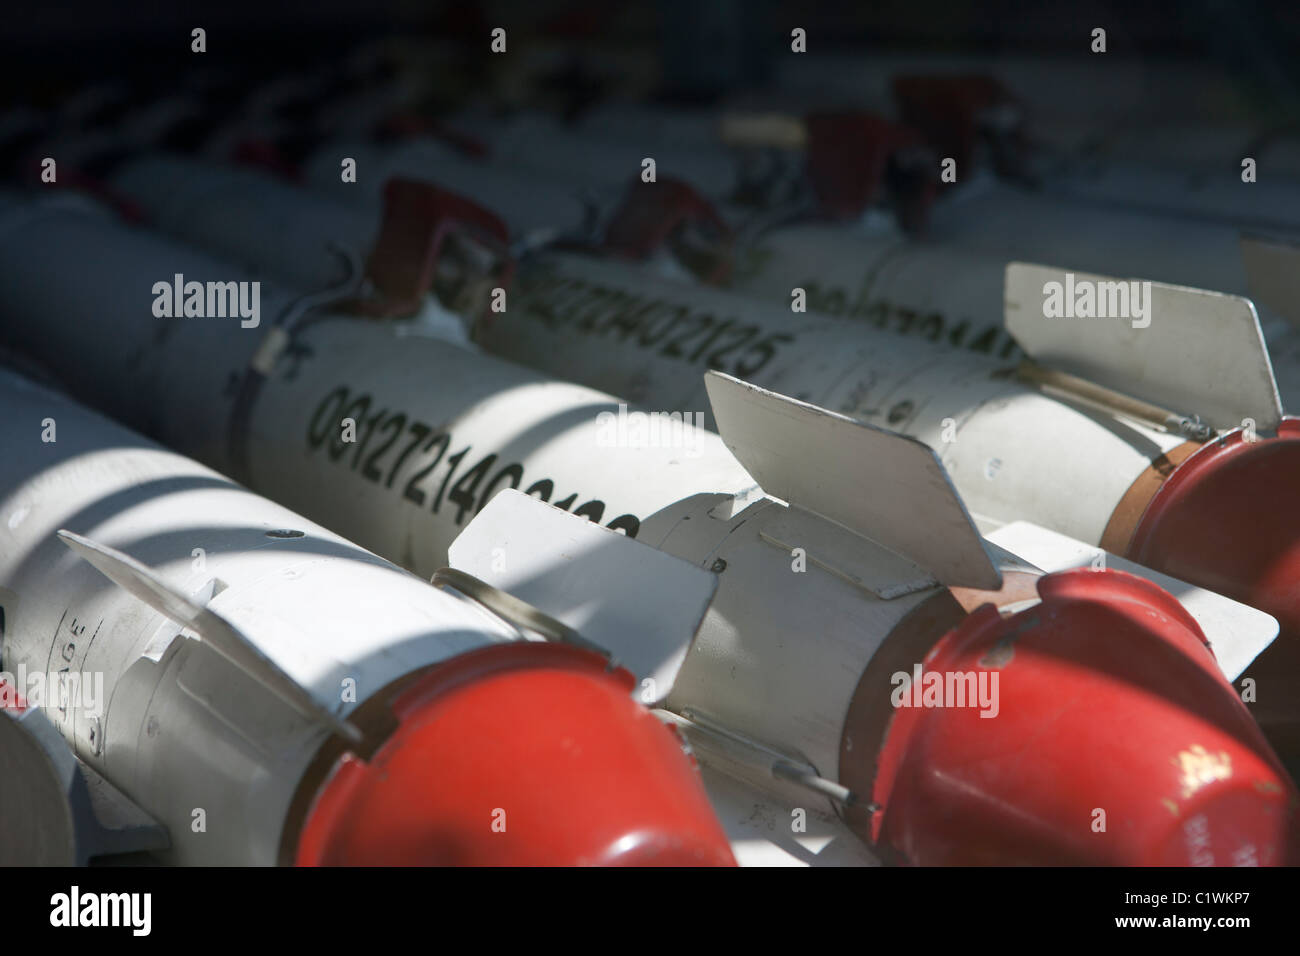 Stockpile of aircraft missiles. Stock Photo